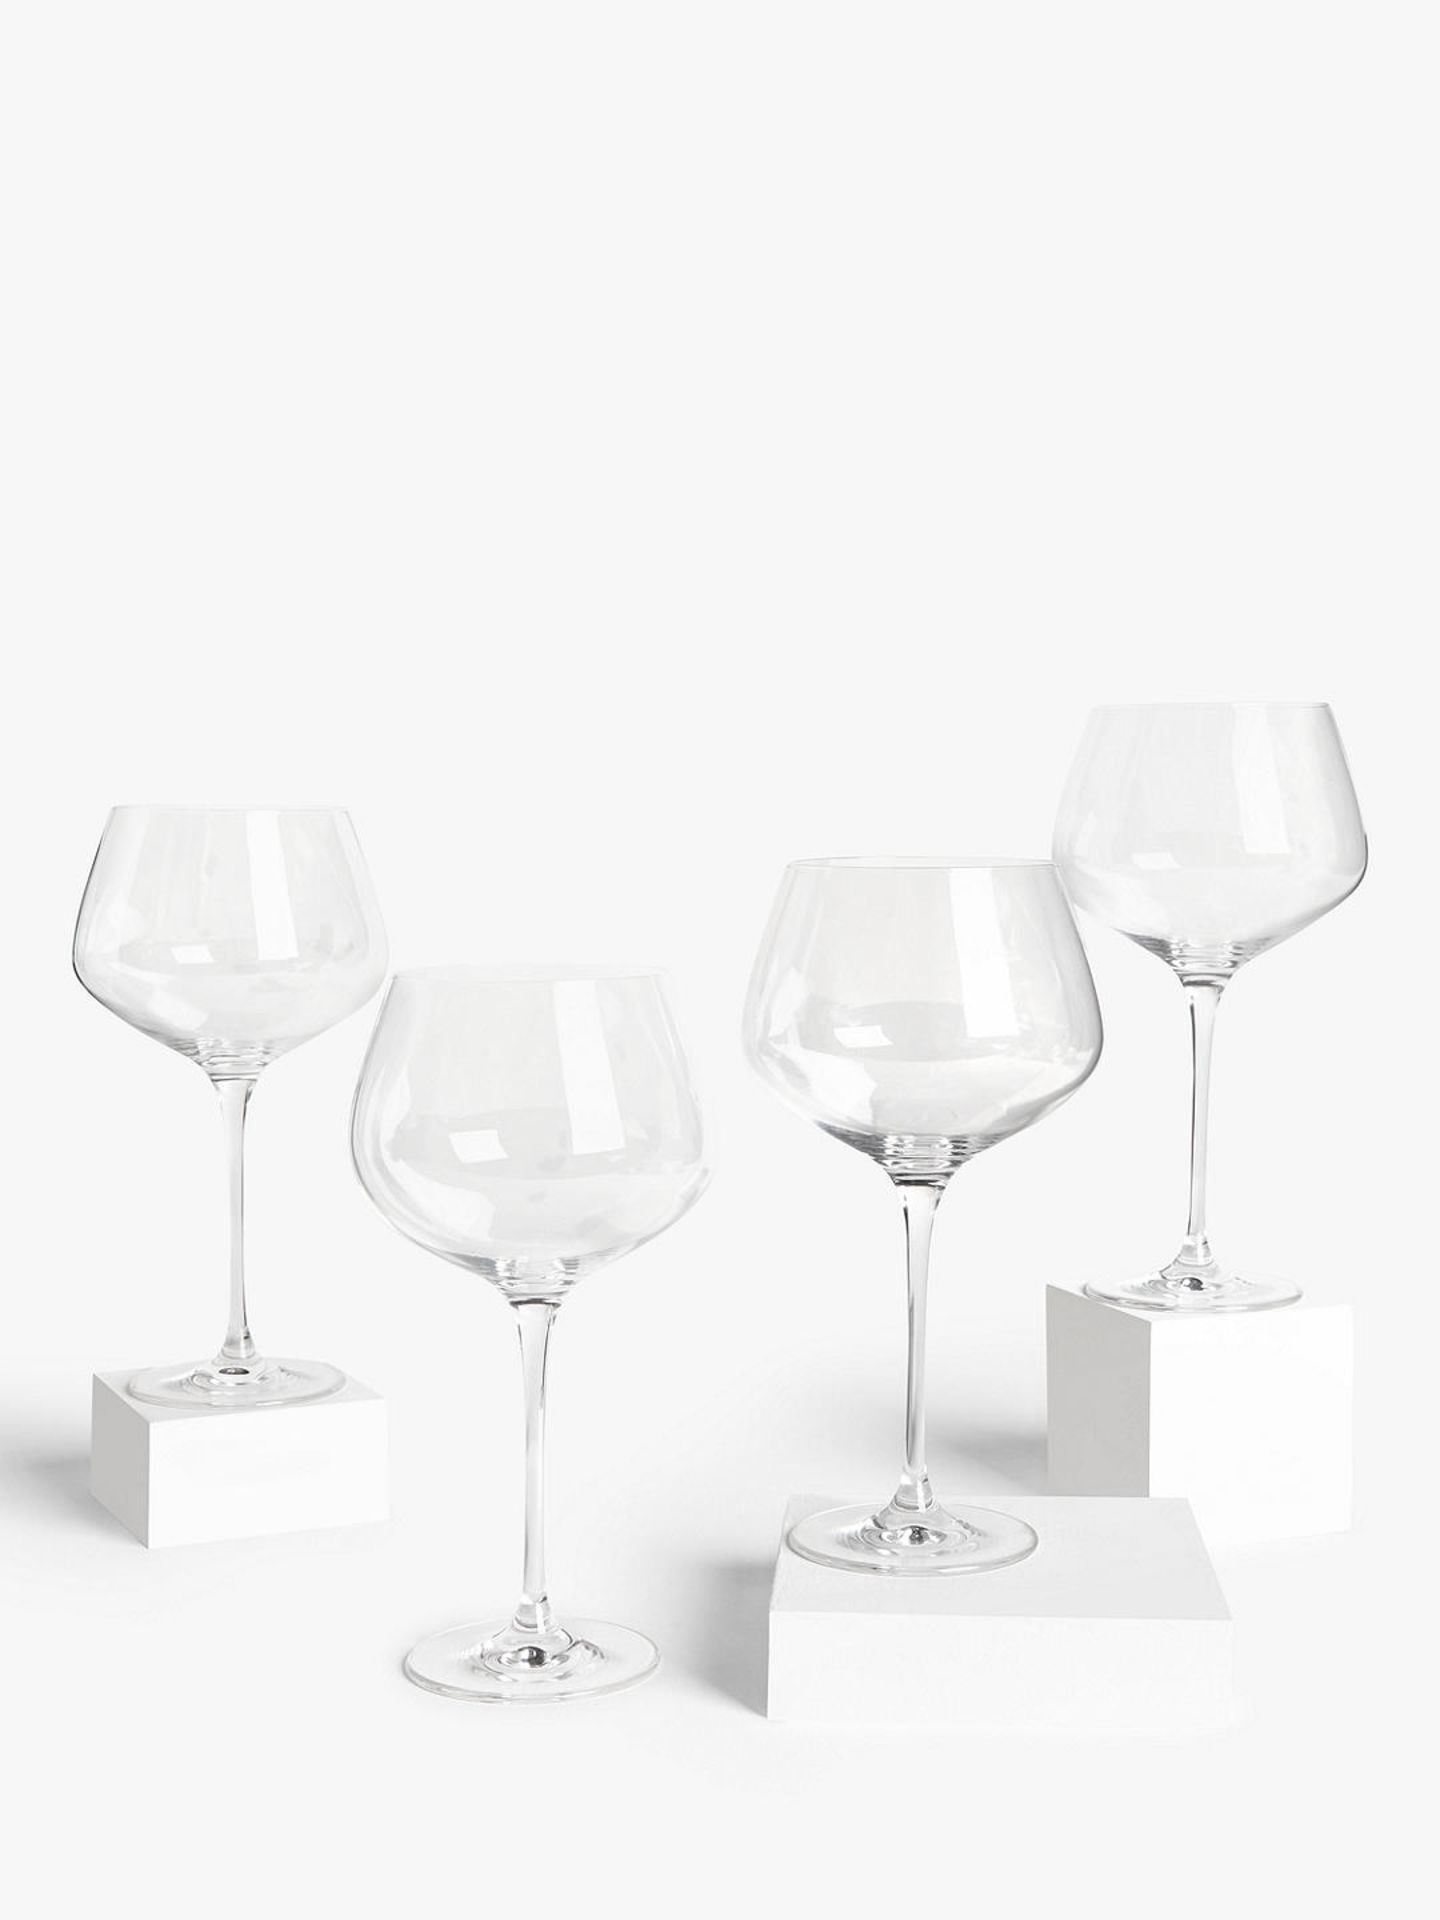 Brand New John Lewis & Partners Copa Gin Glasses, Set of 4, 720ml, Clear - Image 2 of 2